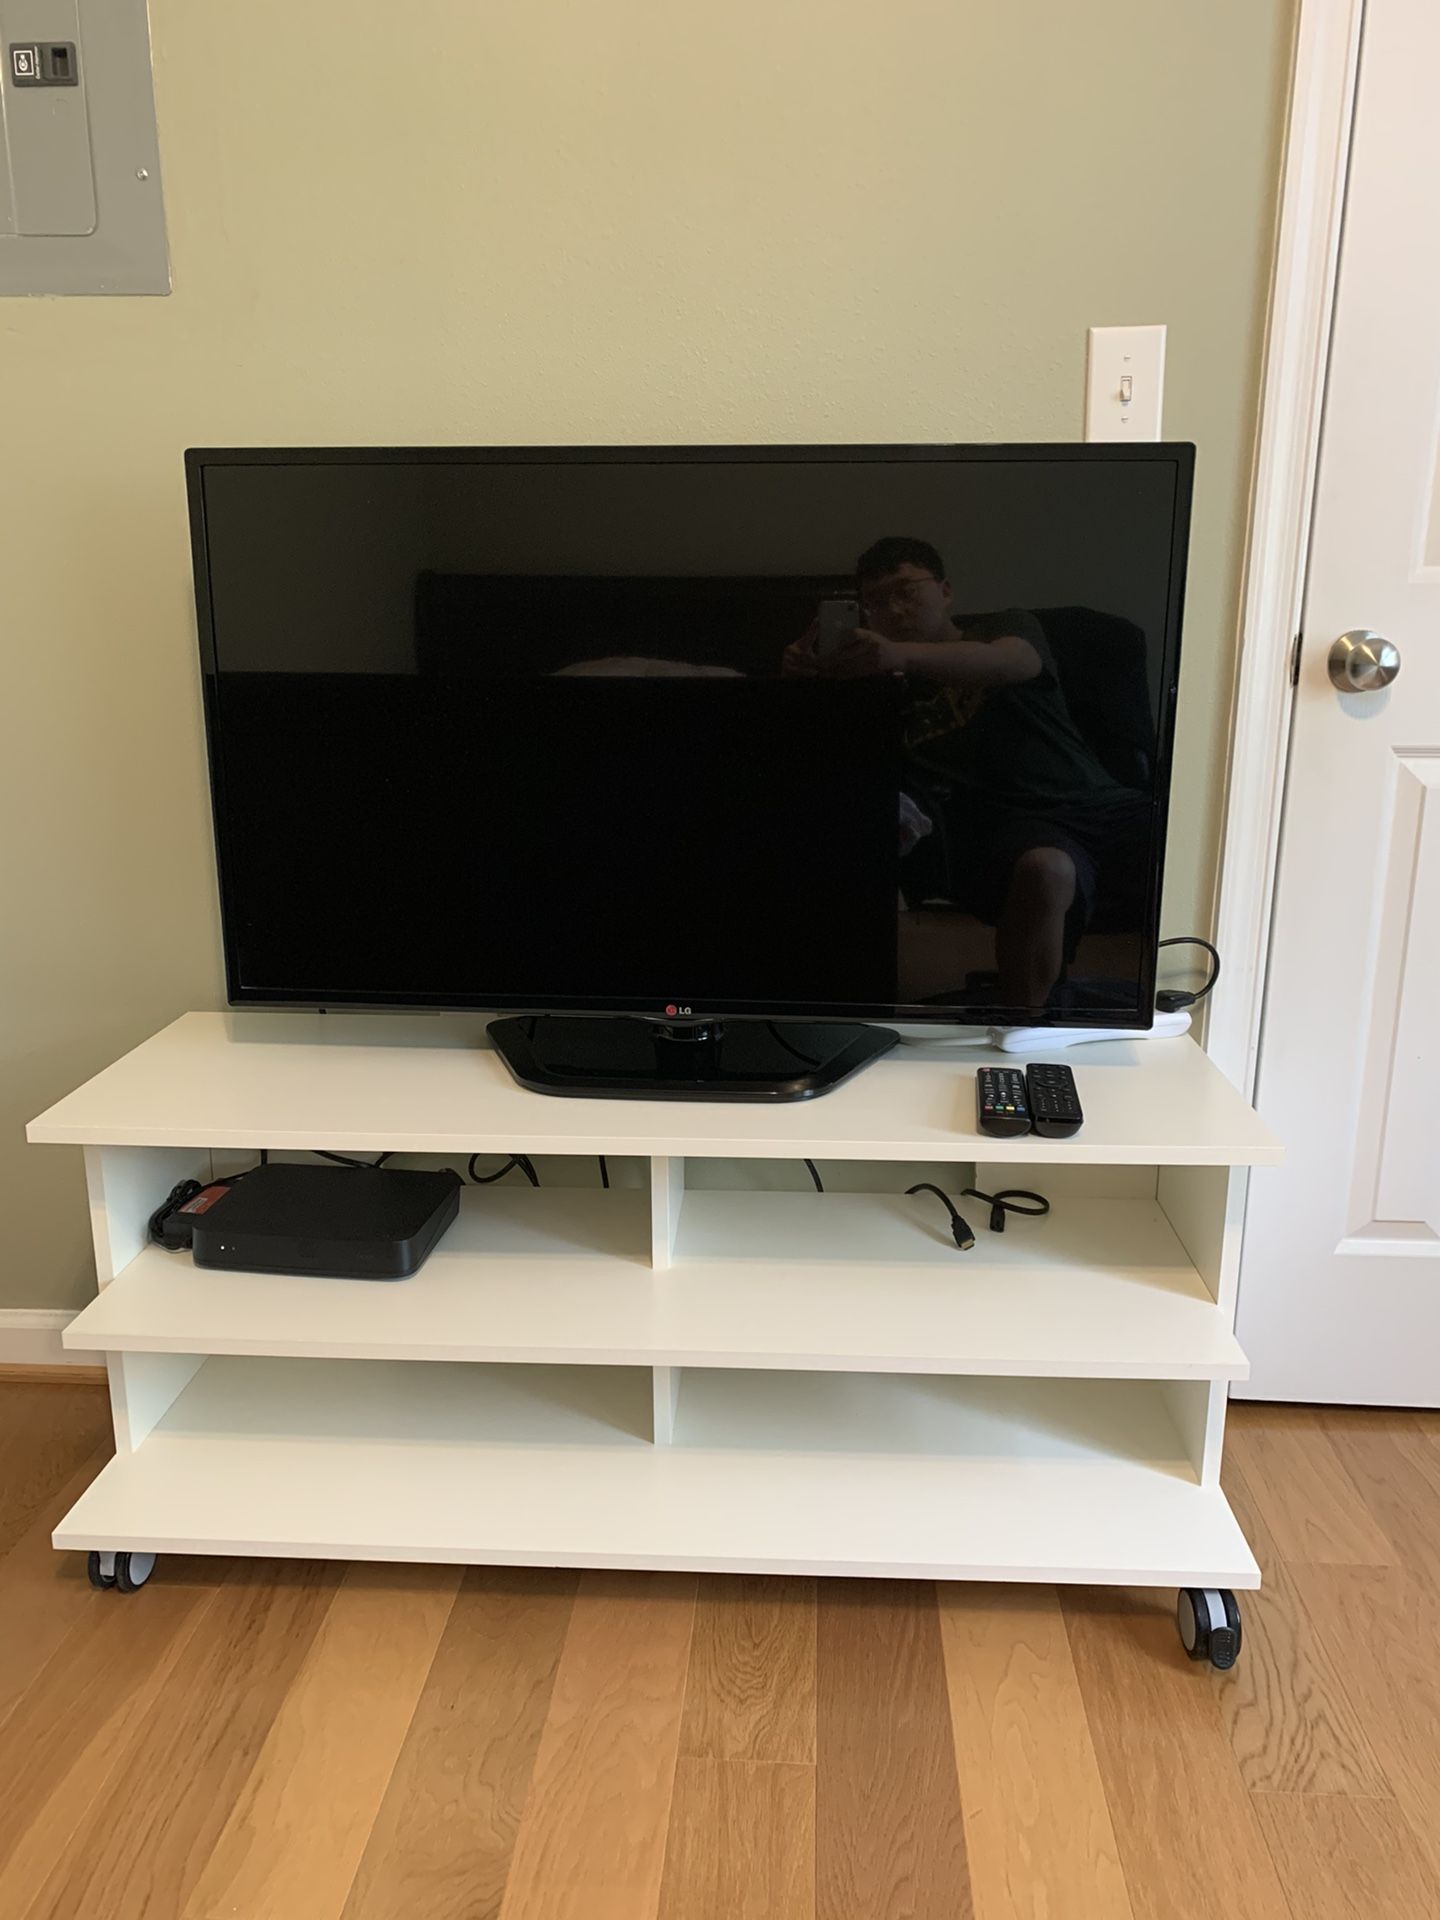 LG 42 inch LED HDTV with stand